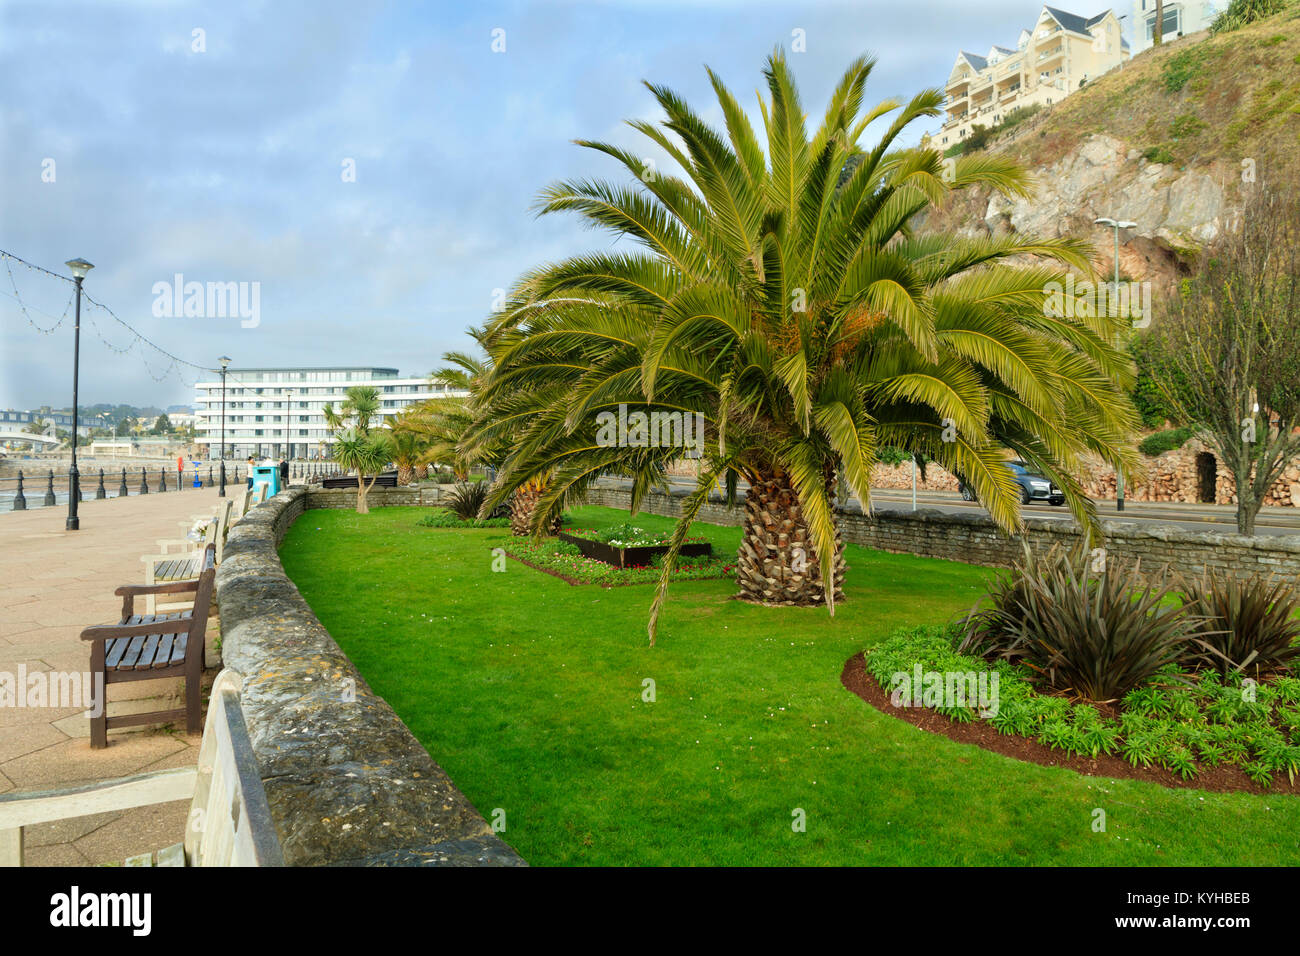 Semi mature Canary Island Date palms, Phoenix canariensis, bring a Mediterranean feel to the seafront at Torquay, Devon, UK Stock Photo